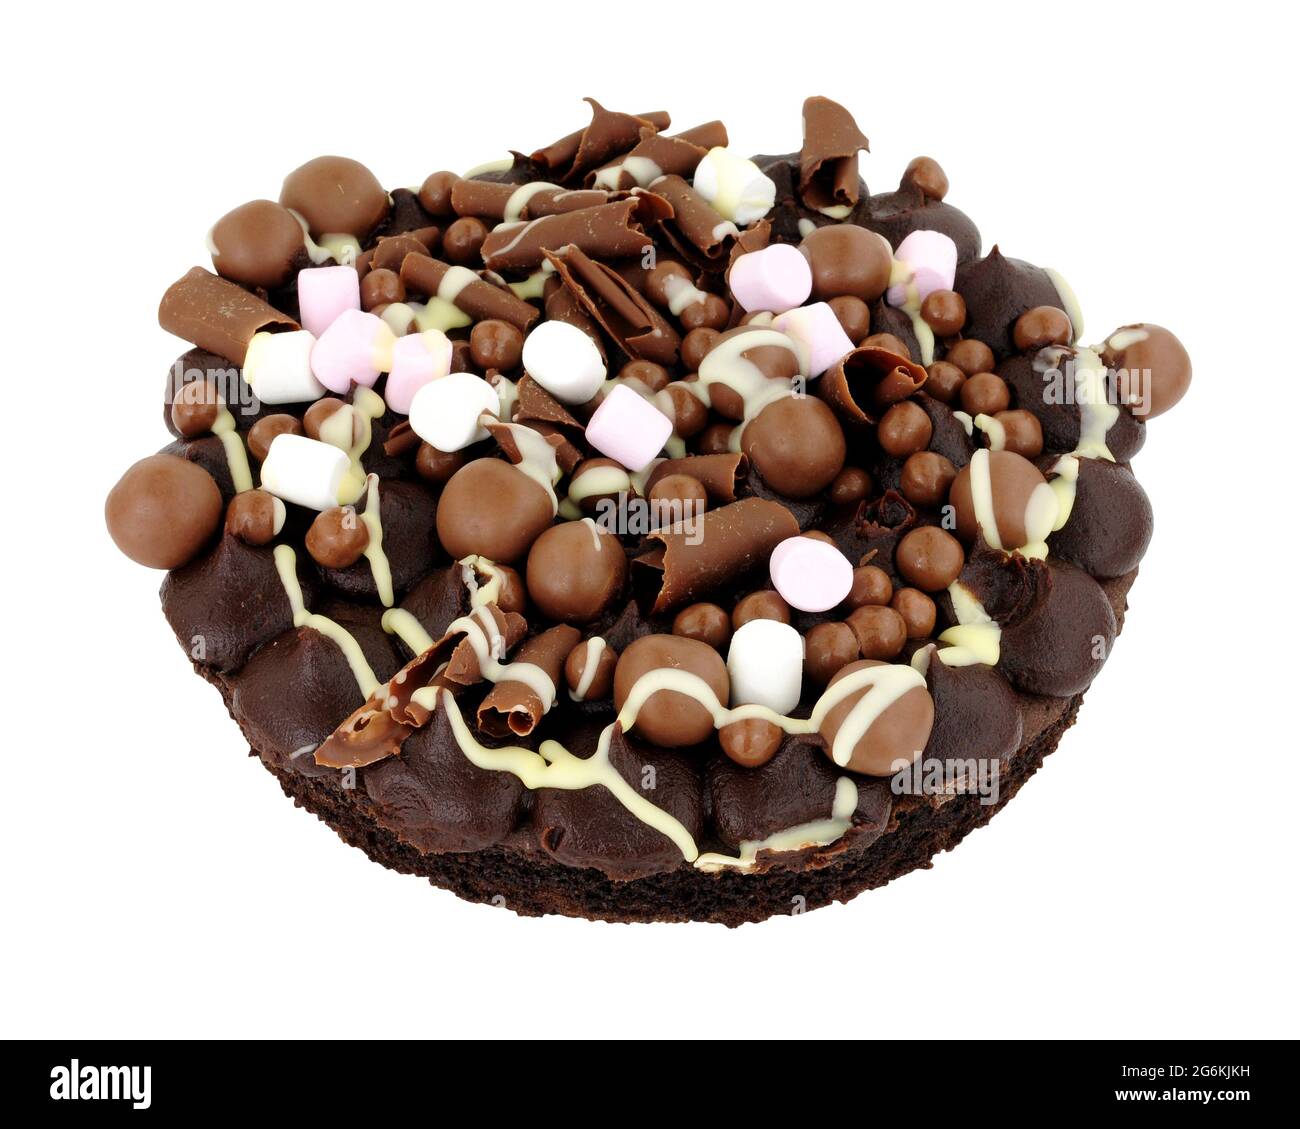 Chocolate rocky road dessert sponge cake decorated with chocolate balls and marshmallows isolated on a white background Stock Photo